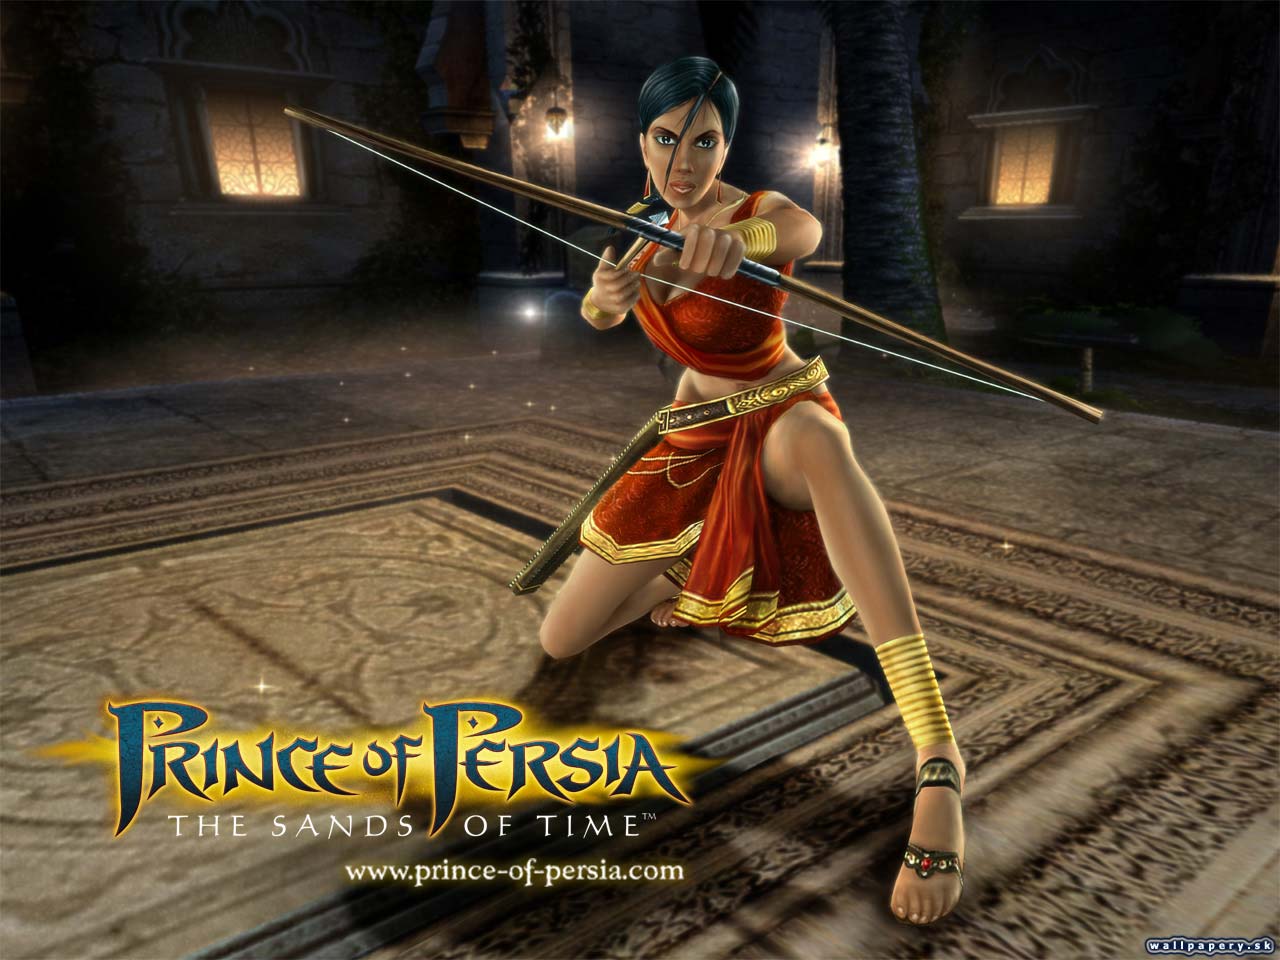 Prince of Persia: The Sands of Time - wallpaper 14